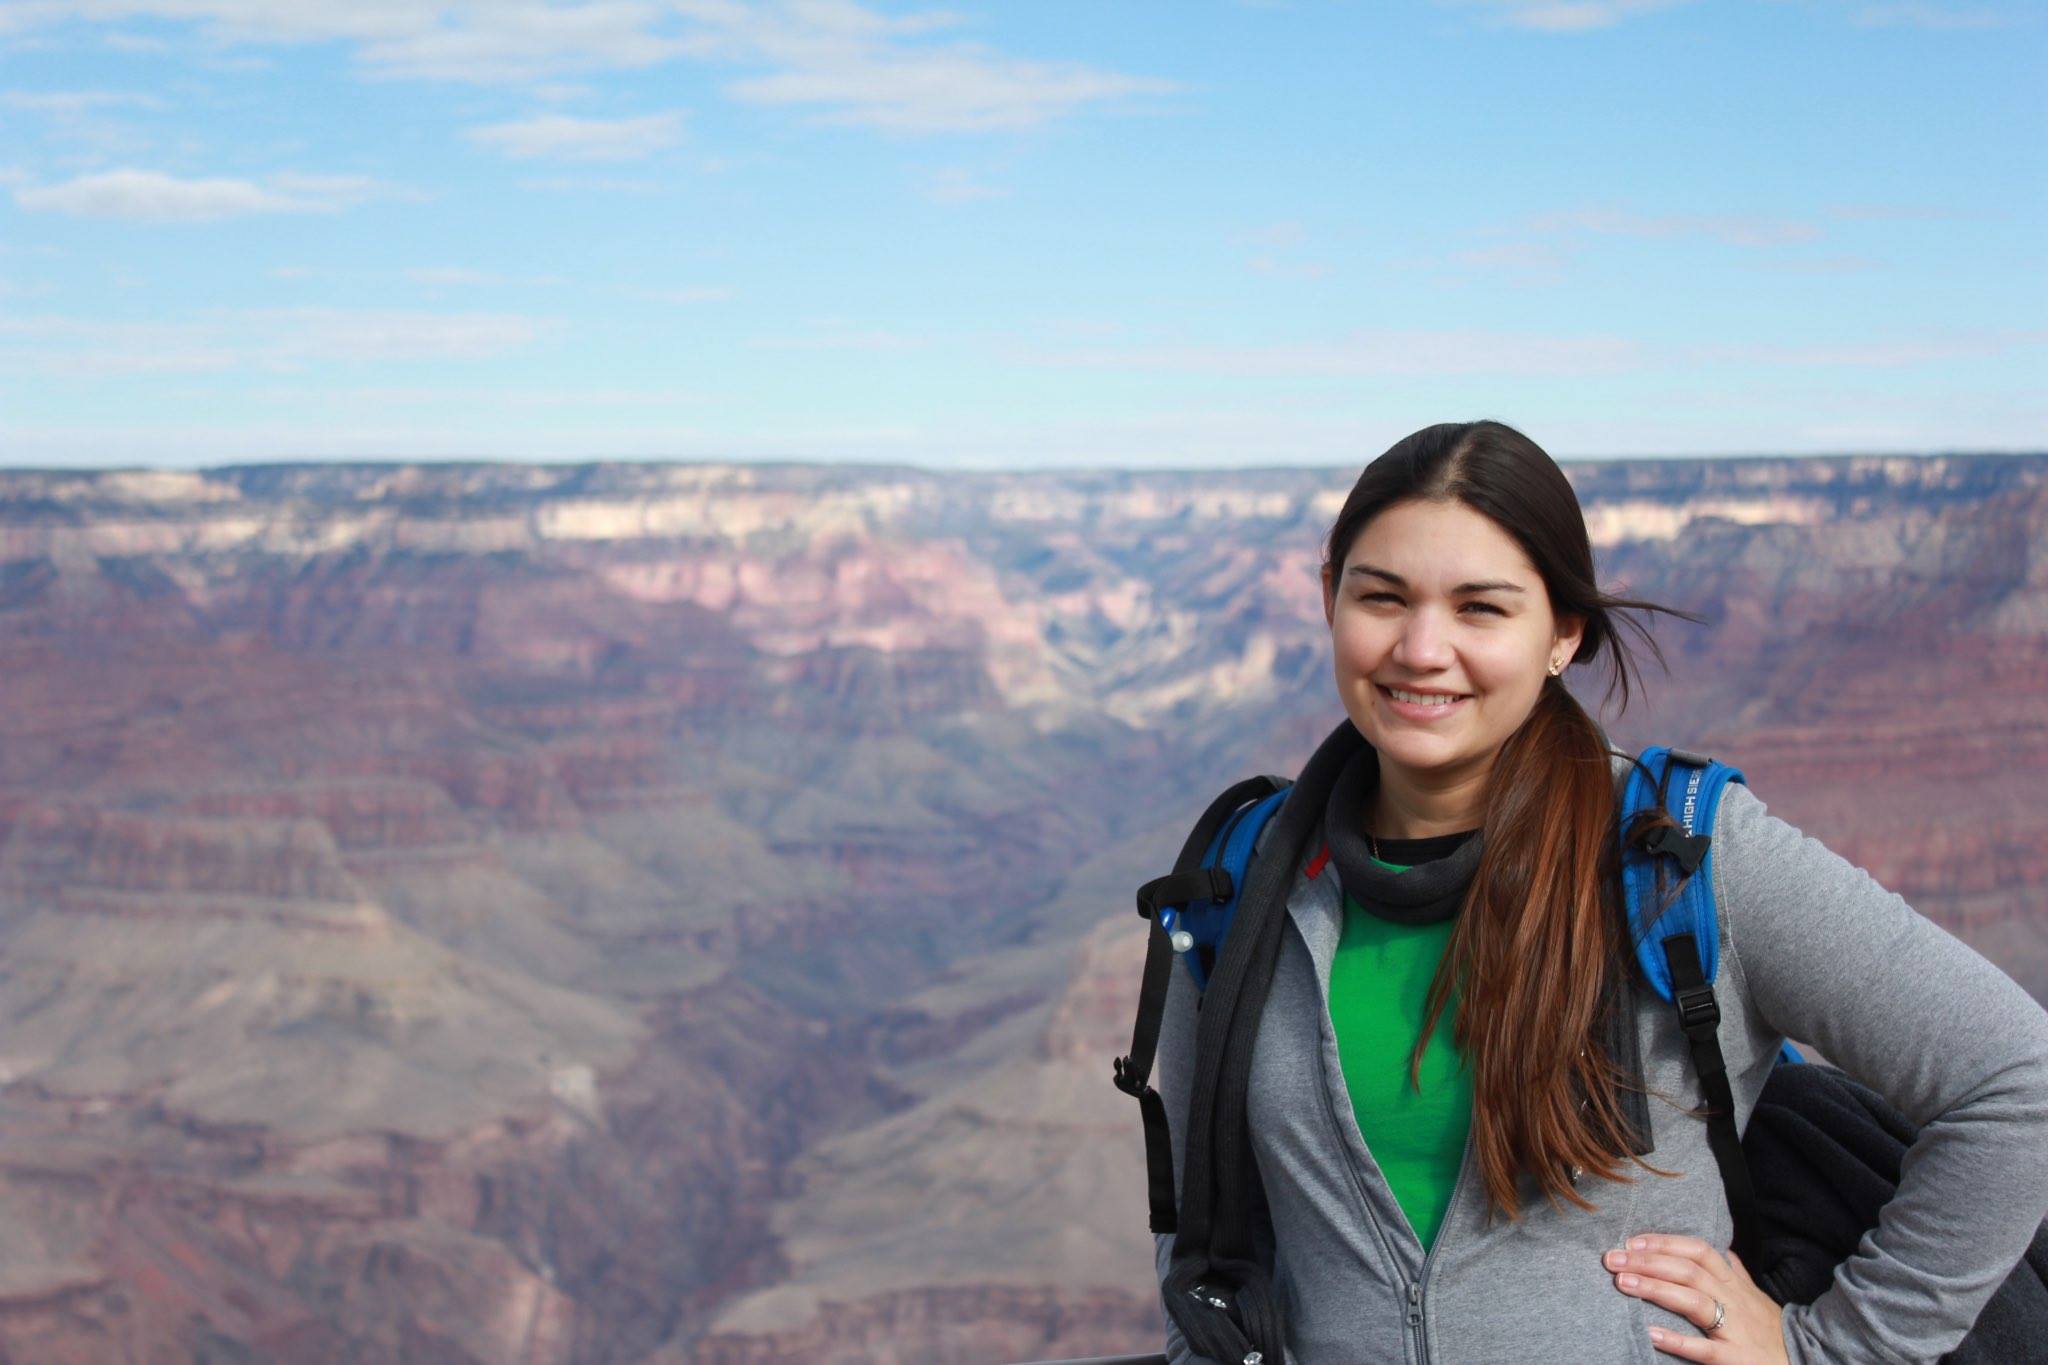 Profile picture at the Grand Canyon.